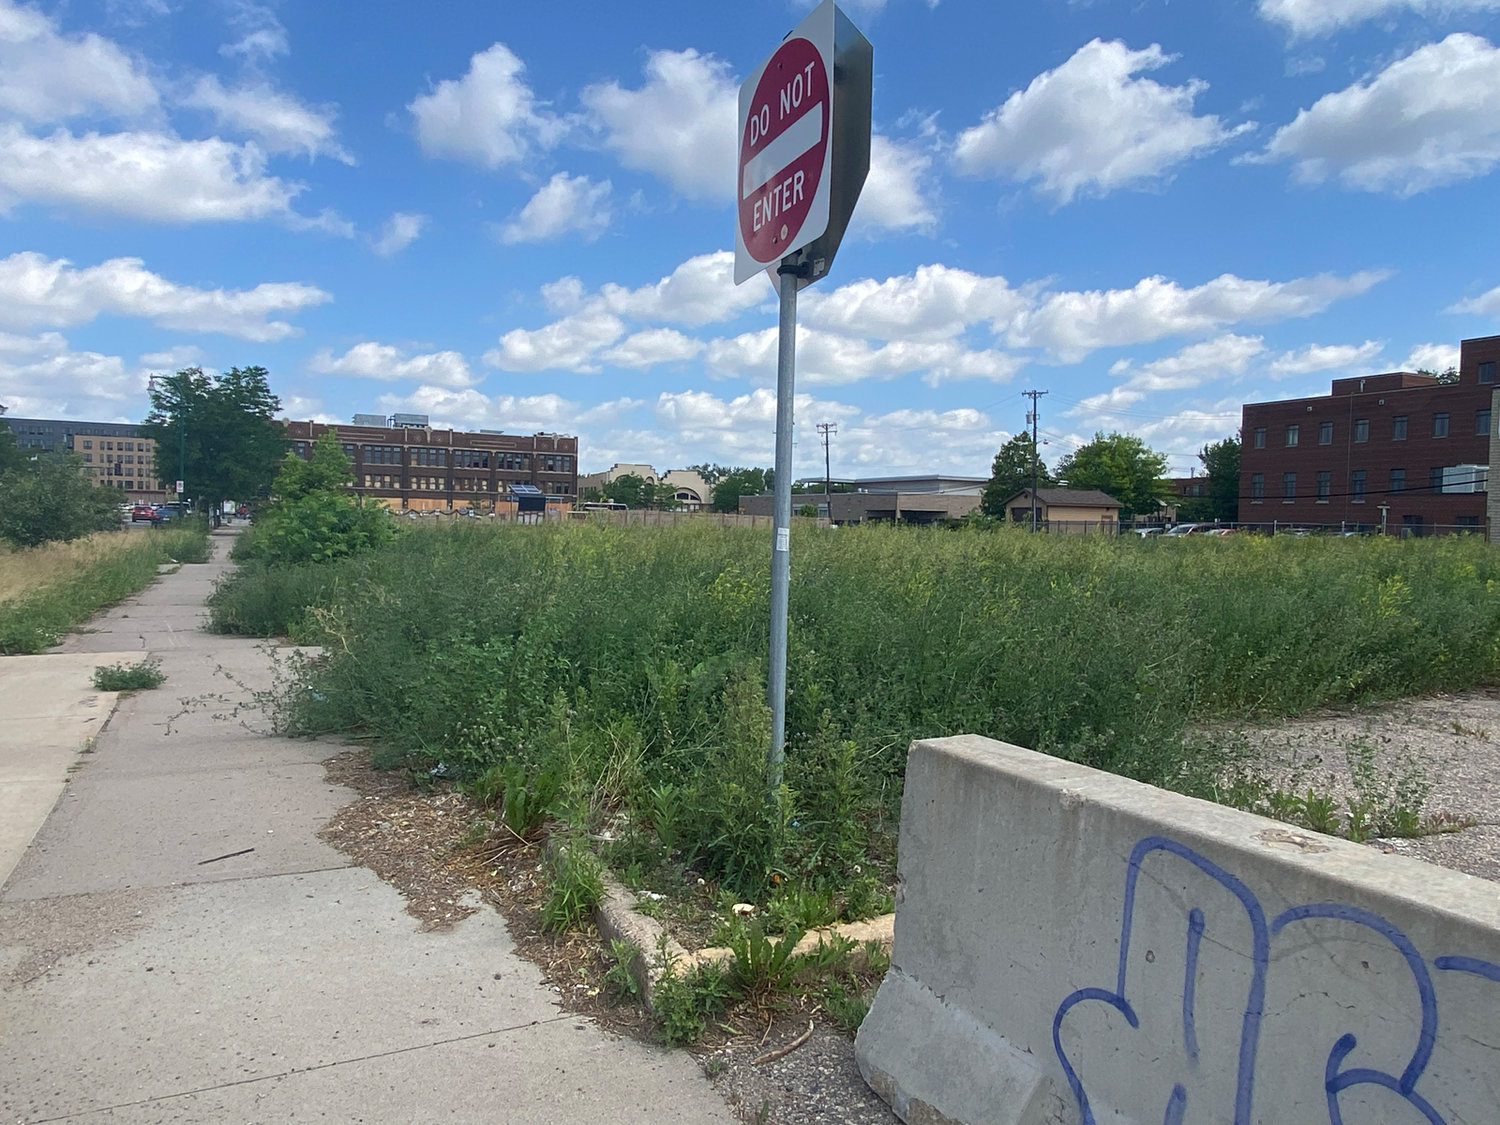 Two years ago, this block was nearly one continuous building. On the south was the Minnehaha Post Office, then MIGIZI, Gandhi Mahal, and the Odd Fellows building that housed many businesses, including Town Talk Diner and El Nuevo Rodeo nightclub. The block remains vacant. (Photo by Tesha M. Christensen)